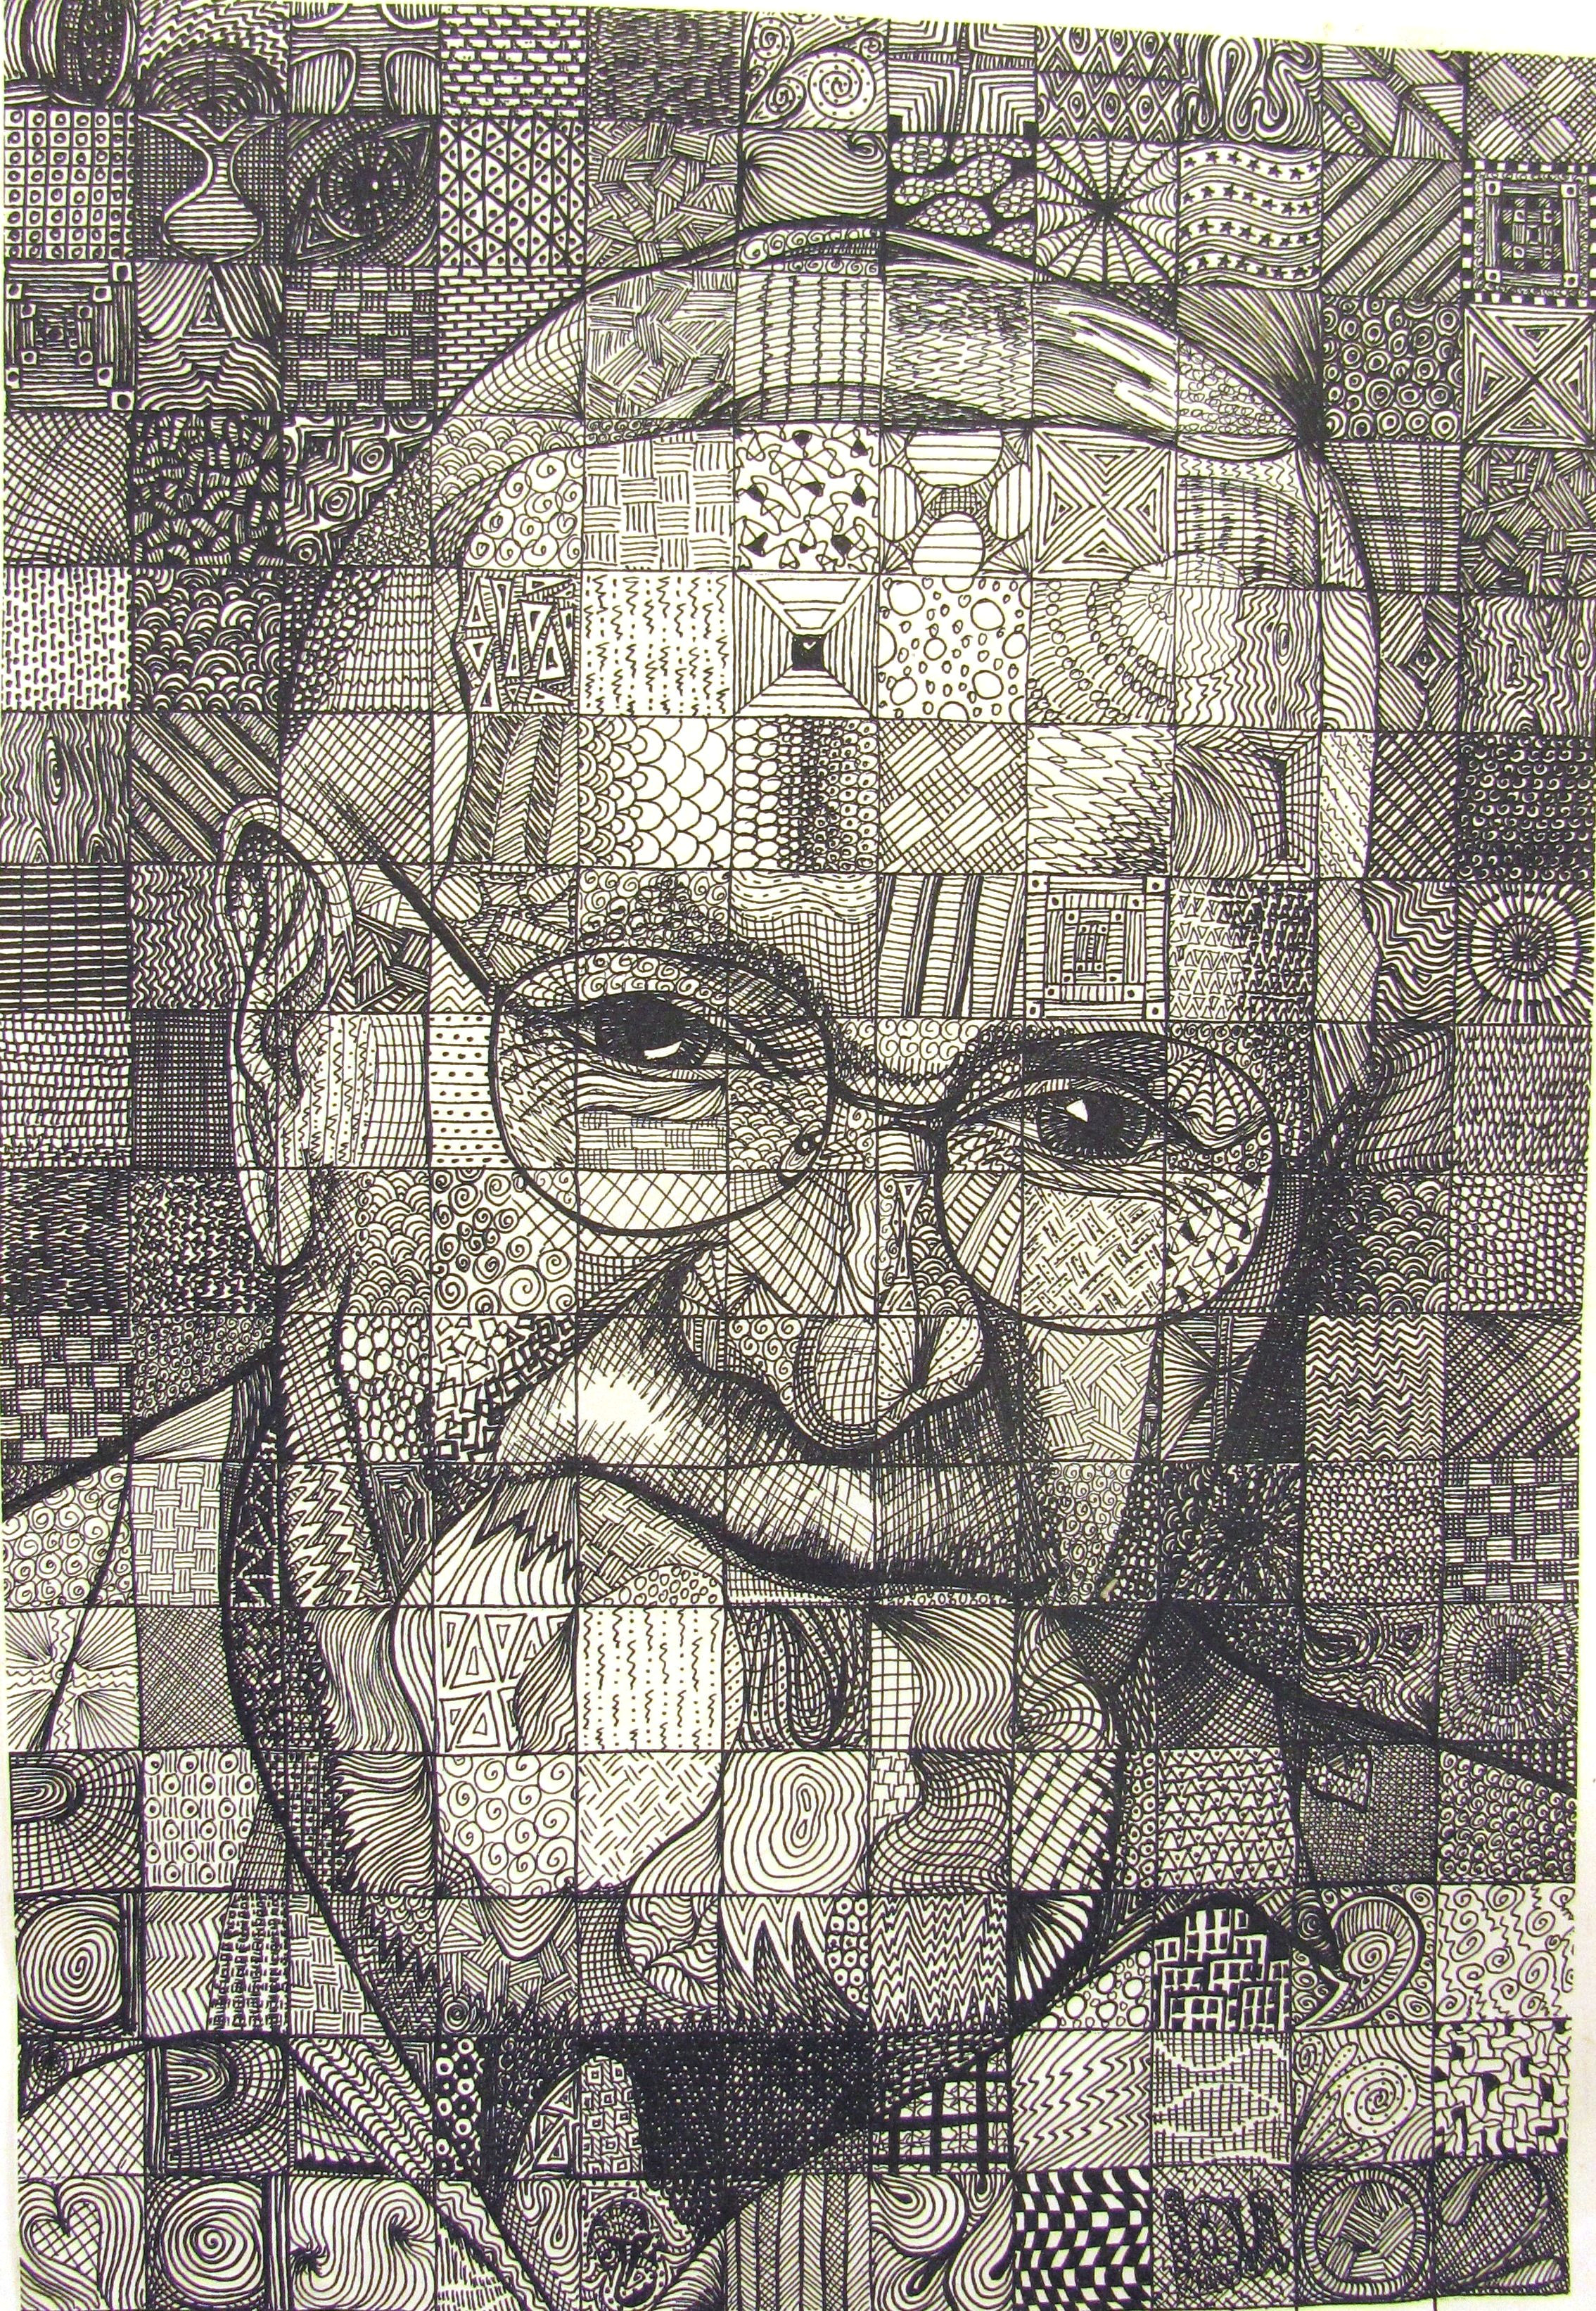 Easy Value Drawings Papa bylou Traylor Example Of Grid Drawing Using Pattern for Value